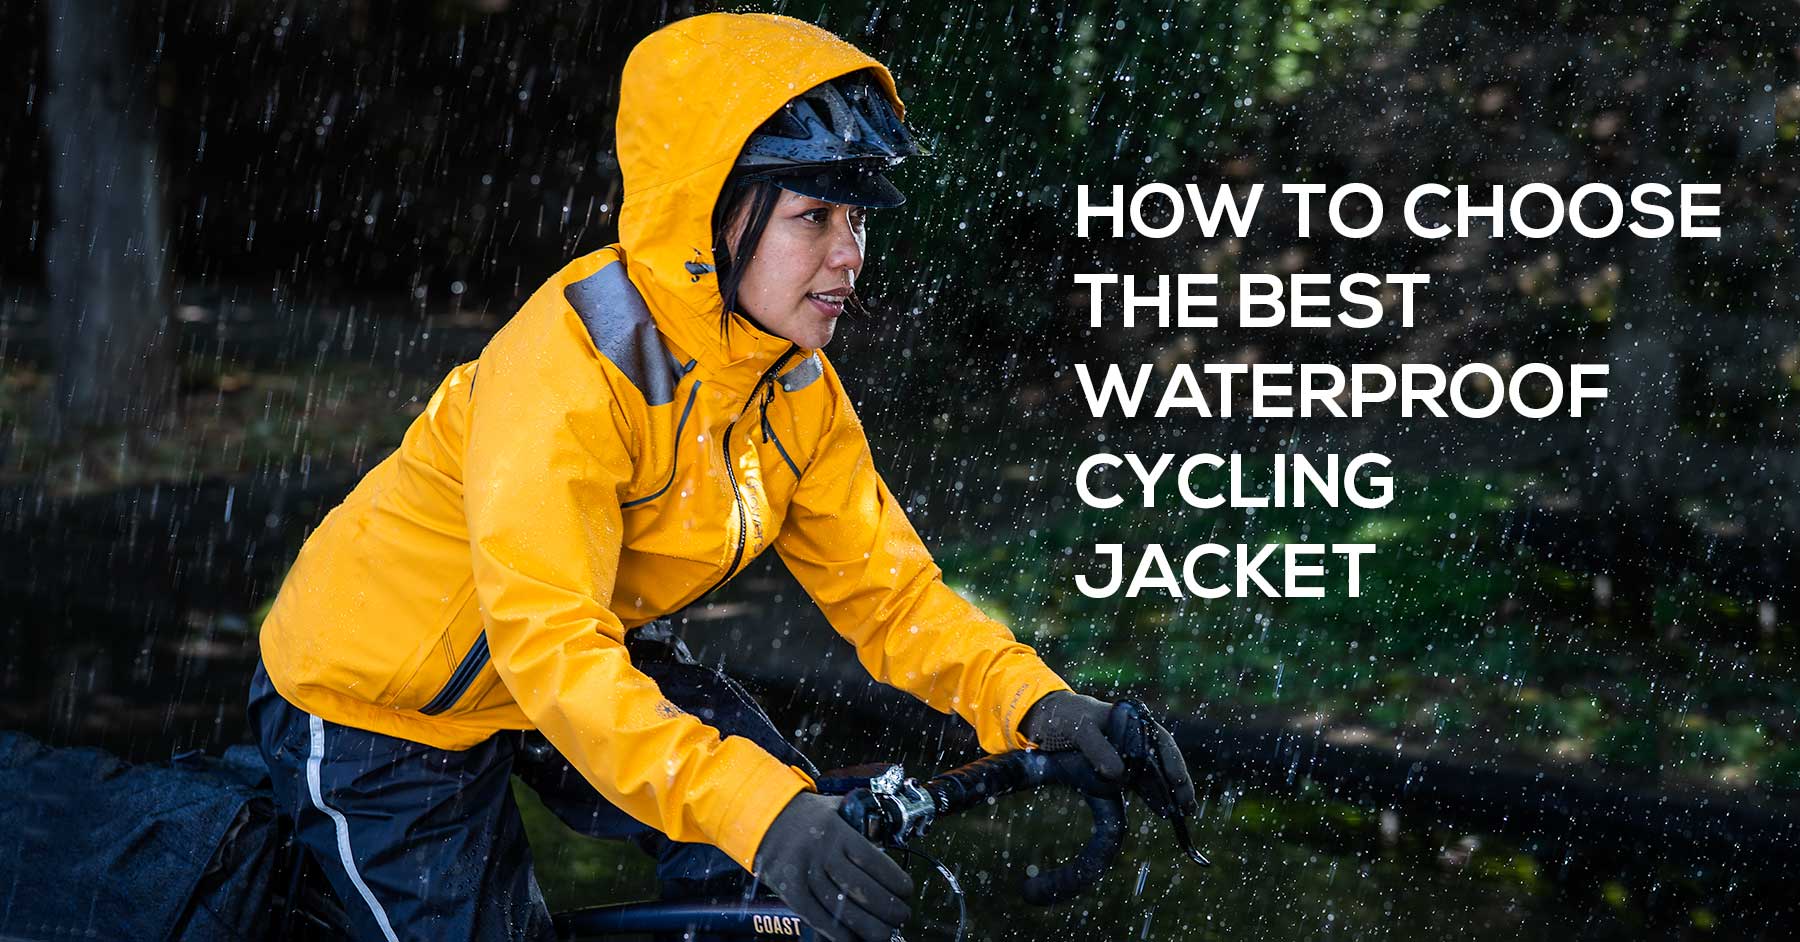 How to choose the best waterproof jacket for cycling